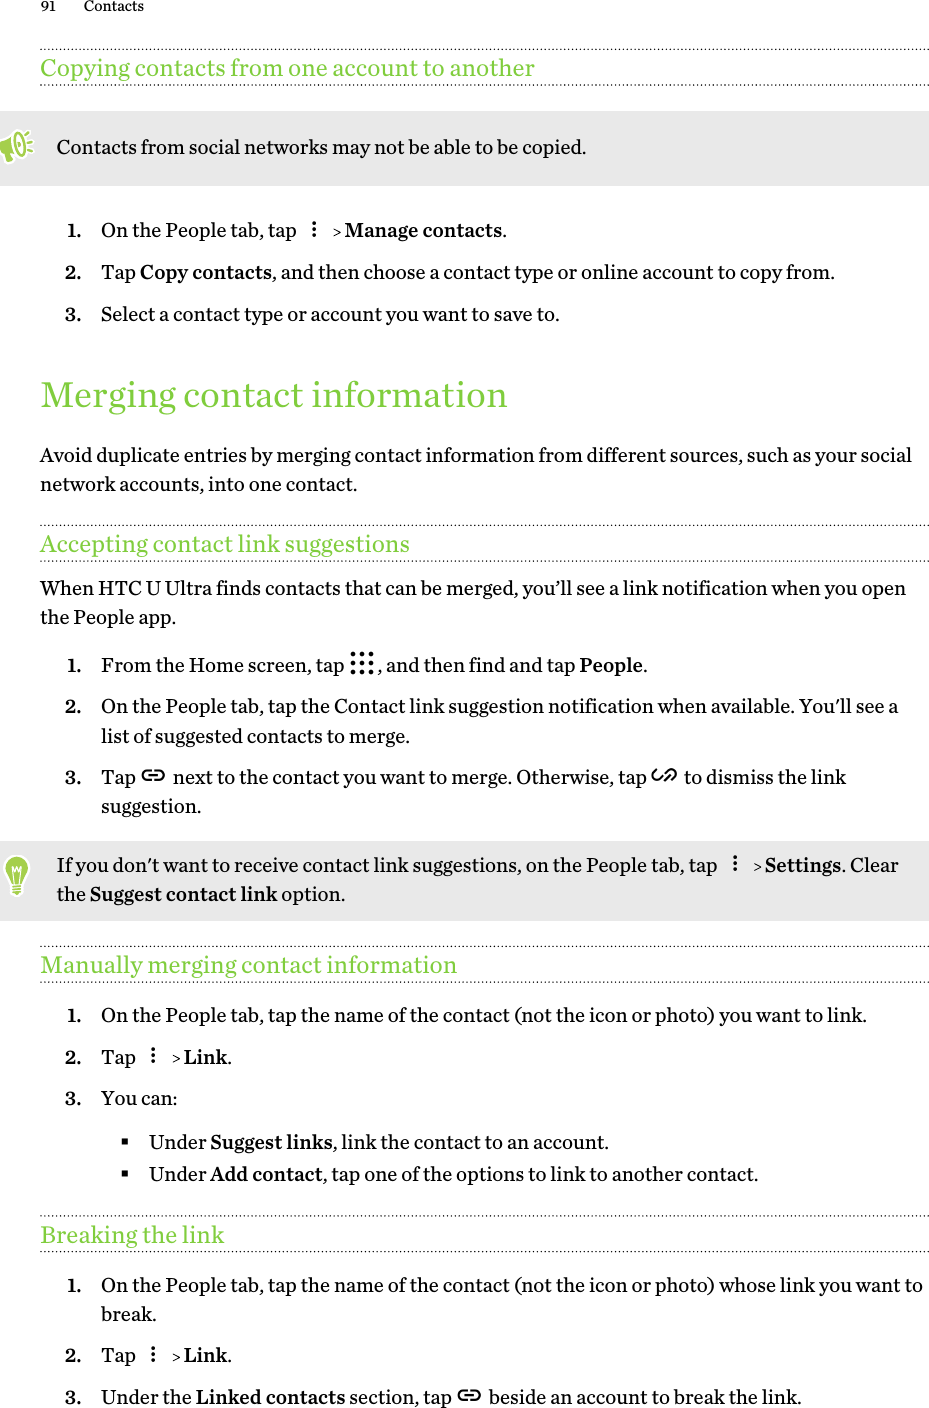 Copying contacts from one account to anotherContacts from social networks may not be able to be copied.1. On the People tab, tap     Manage contacts.2. Tap Copy contacts, and then choose a contact type or online account to copy from.3. Select a contact type or account you want to save to.Merging contact informationAvoid duplicate entries by merging contact information from different sources, such as your socialnetwork accounts, into one contact.Accepting contact link suggestionsWhen HTC U Ultra finds contacts that can be merged, you’ll see a link notification when you openthe People app.1. From the Home screen, tap  , and then find and tap People.2. On the People tab, tap the Contact link suggestion notification when available. You&apos;ll see alist of suggested contacts to merge.3. Tap   next to the contact you want to merge. Otherwise, tap   to dismiss the linksuggestion.If you don&apos;t want to receive contact link suggestions, on the People tab, tap     Settings. Clearthe Suggest contact link option.Manually merging contact information1. On the People tab, tap the name of the contact (not the icon or photo) you want to link.2. Tap     Link.3. You can:§Under Suggest links, link the contact to an account.§Under Add contact, tap one of the options to link to another contact.Breaking the link1. On the People tab, tap the name of the contact (not the icon or photo) whose link you want tobreak.2. Tap     Link.3. Under the Linked contacts section, tap   beside an account to break the link.91 Contacts